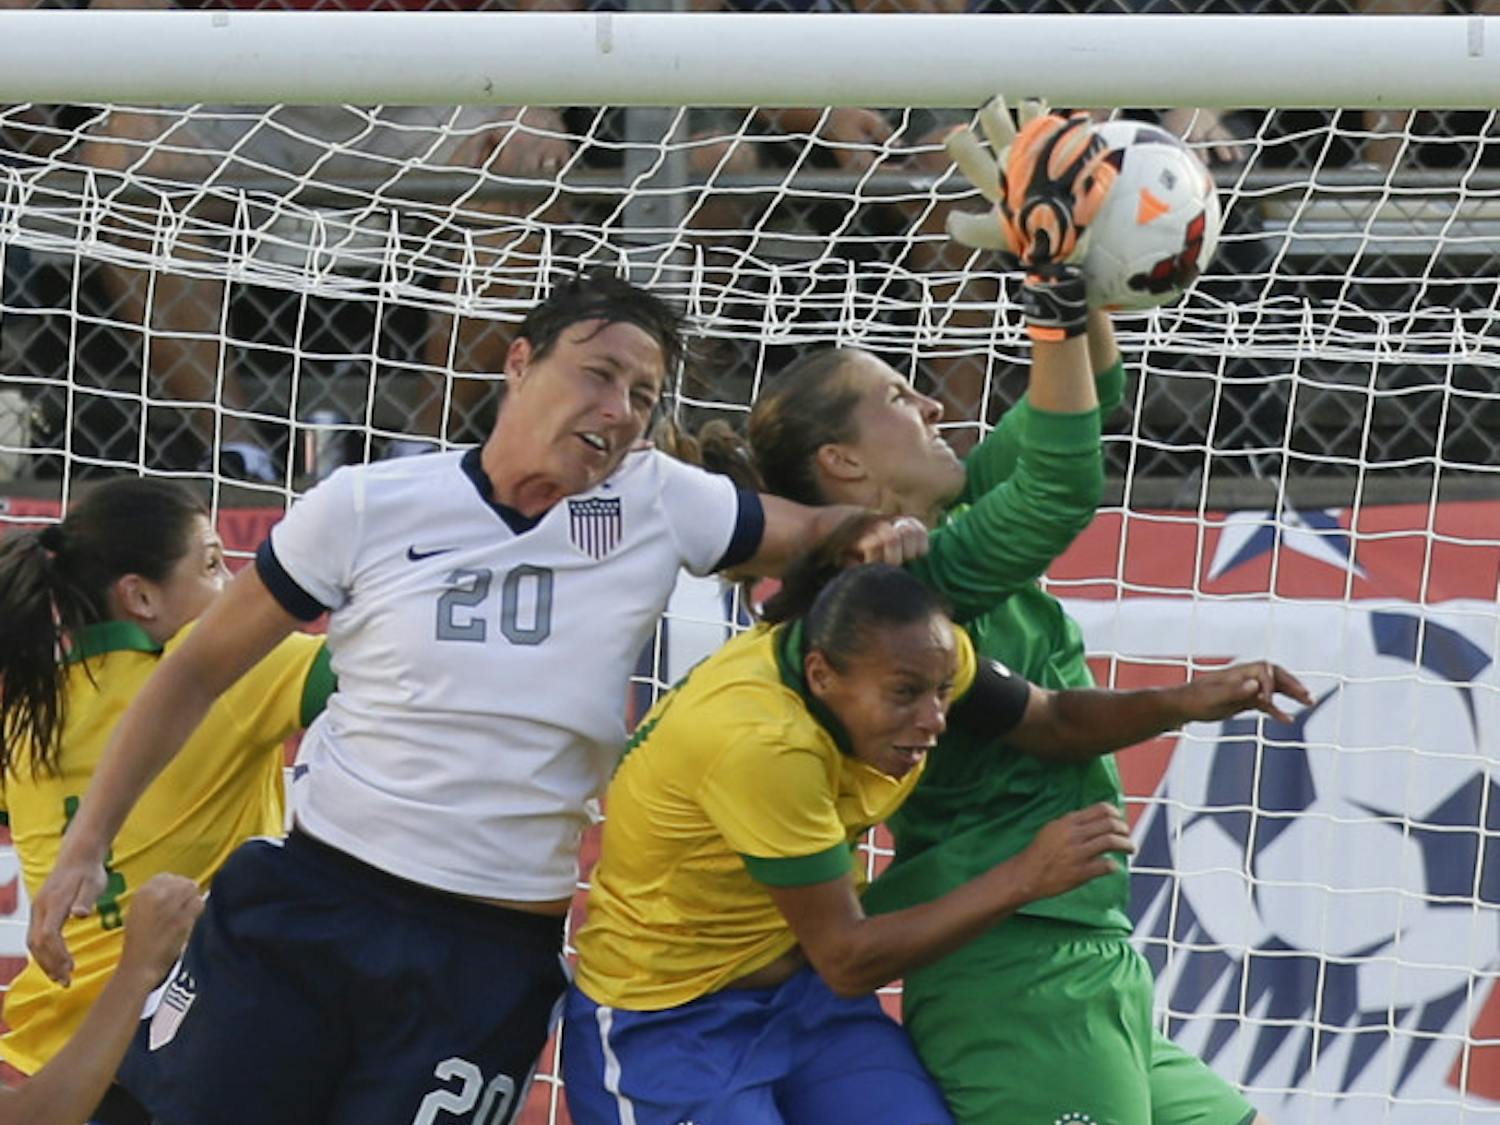 U.S. forward Abby Wambach (20) tries to head the ball in the goal during the first half of an international friendly soccer match against Brazil in Orlando on Sunday.